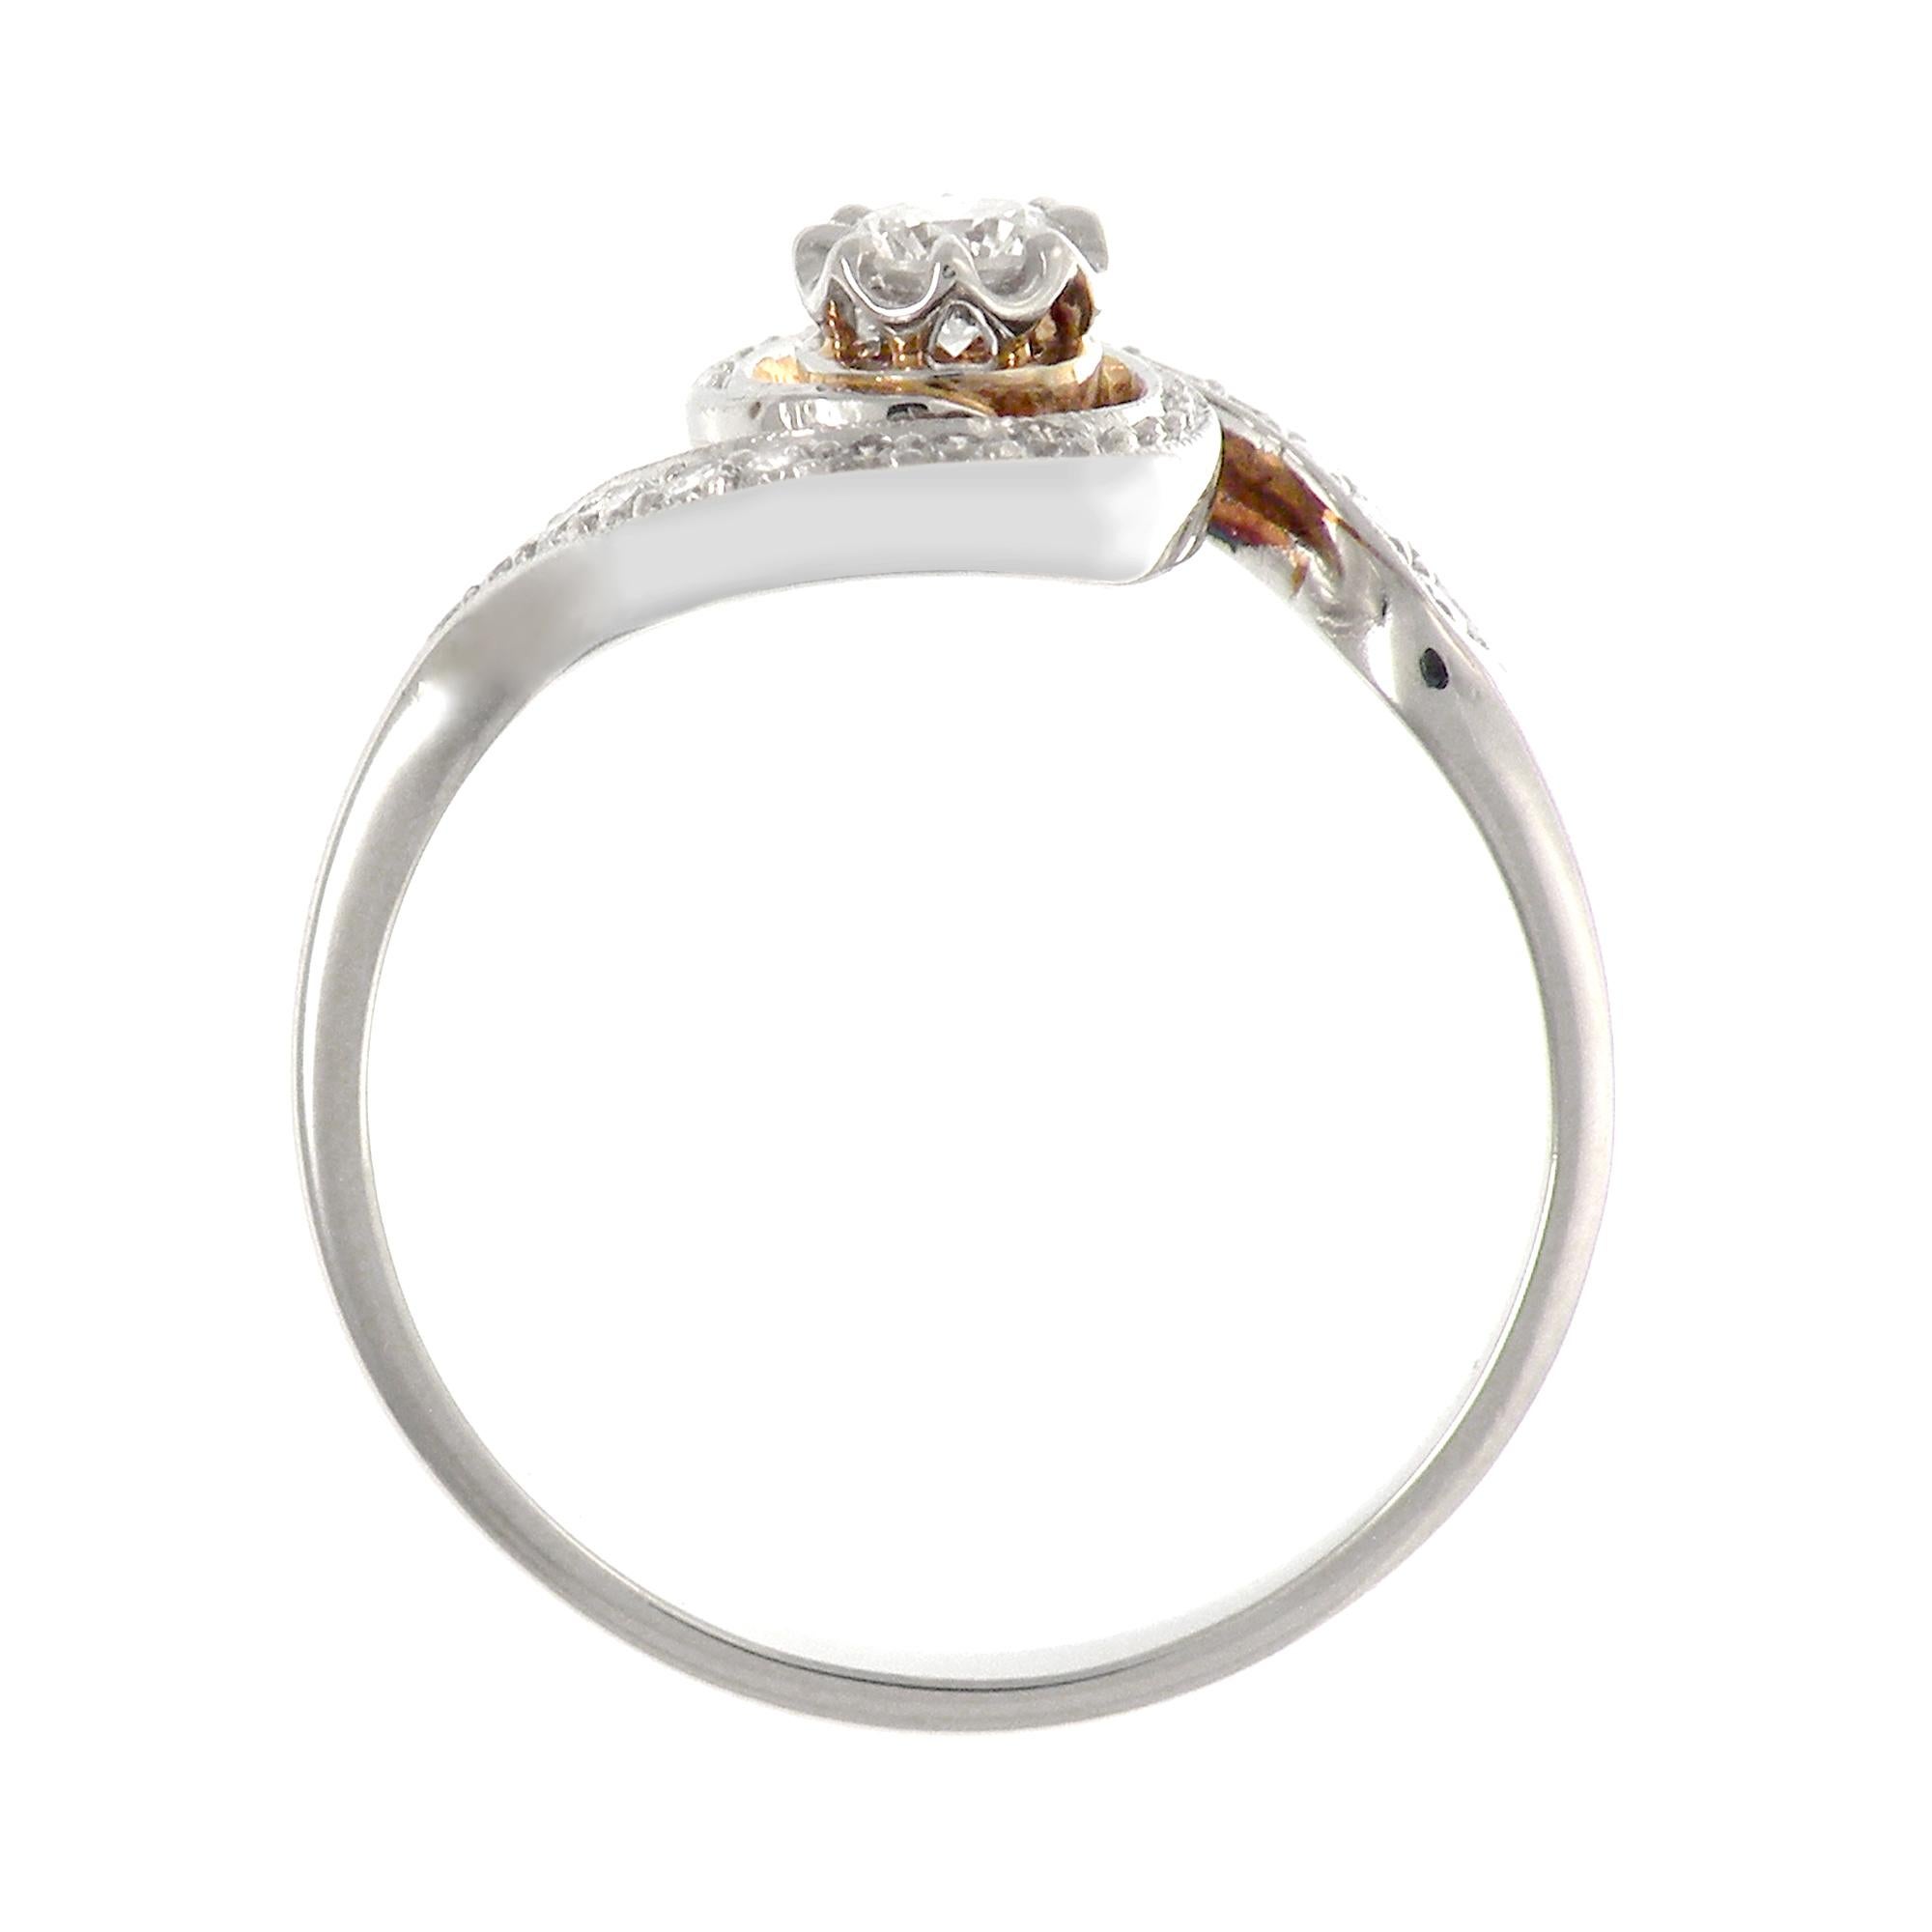 This striking platinum engagement ring Edwardian era inspired is set with a 0.17 ct center diamond. Small diamonds are grain set on the shoulders, weight 0.335 carat in total.

Ring size: 7